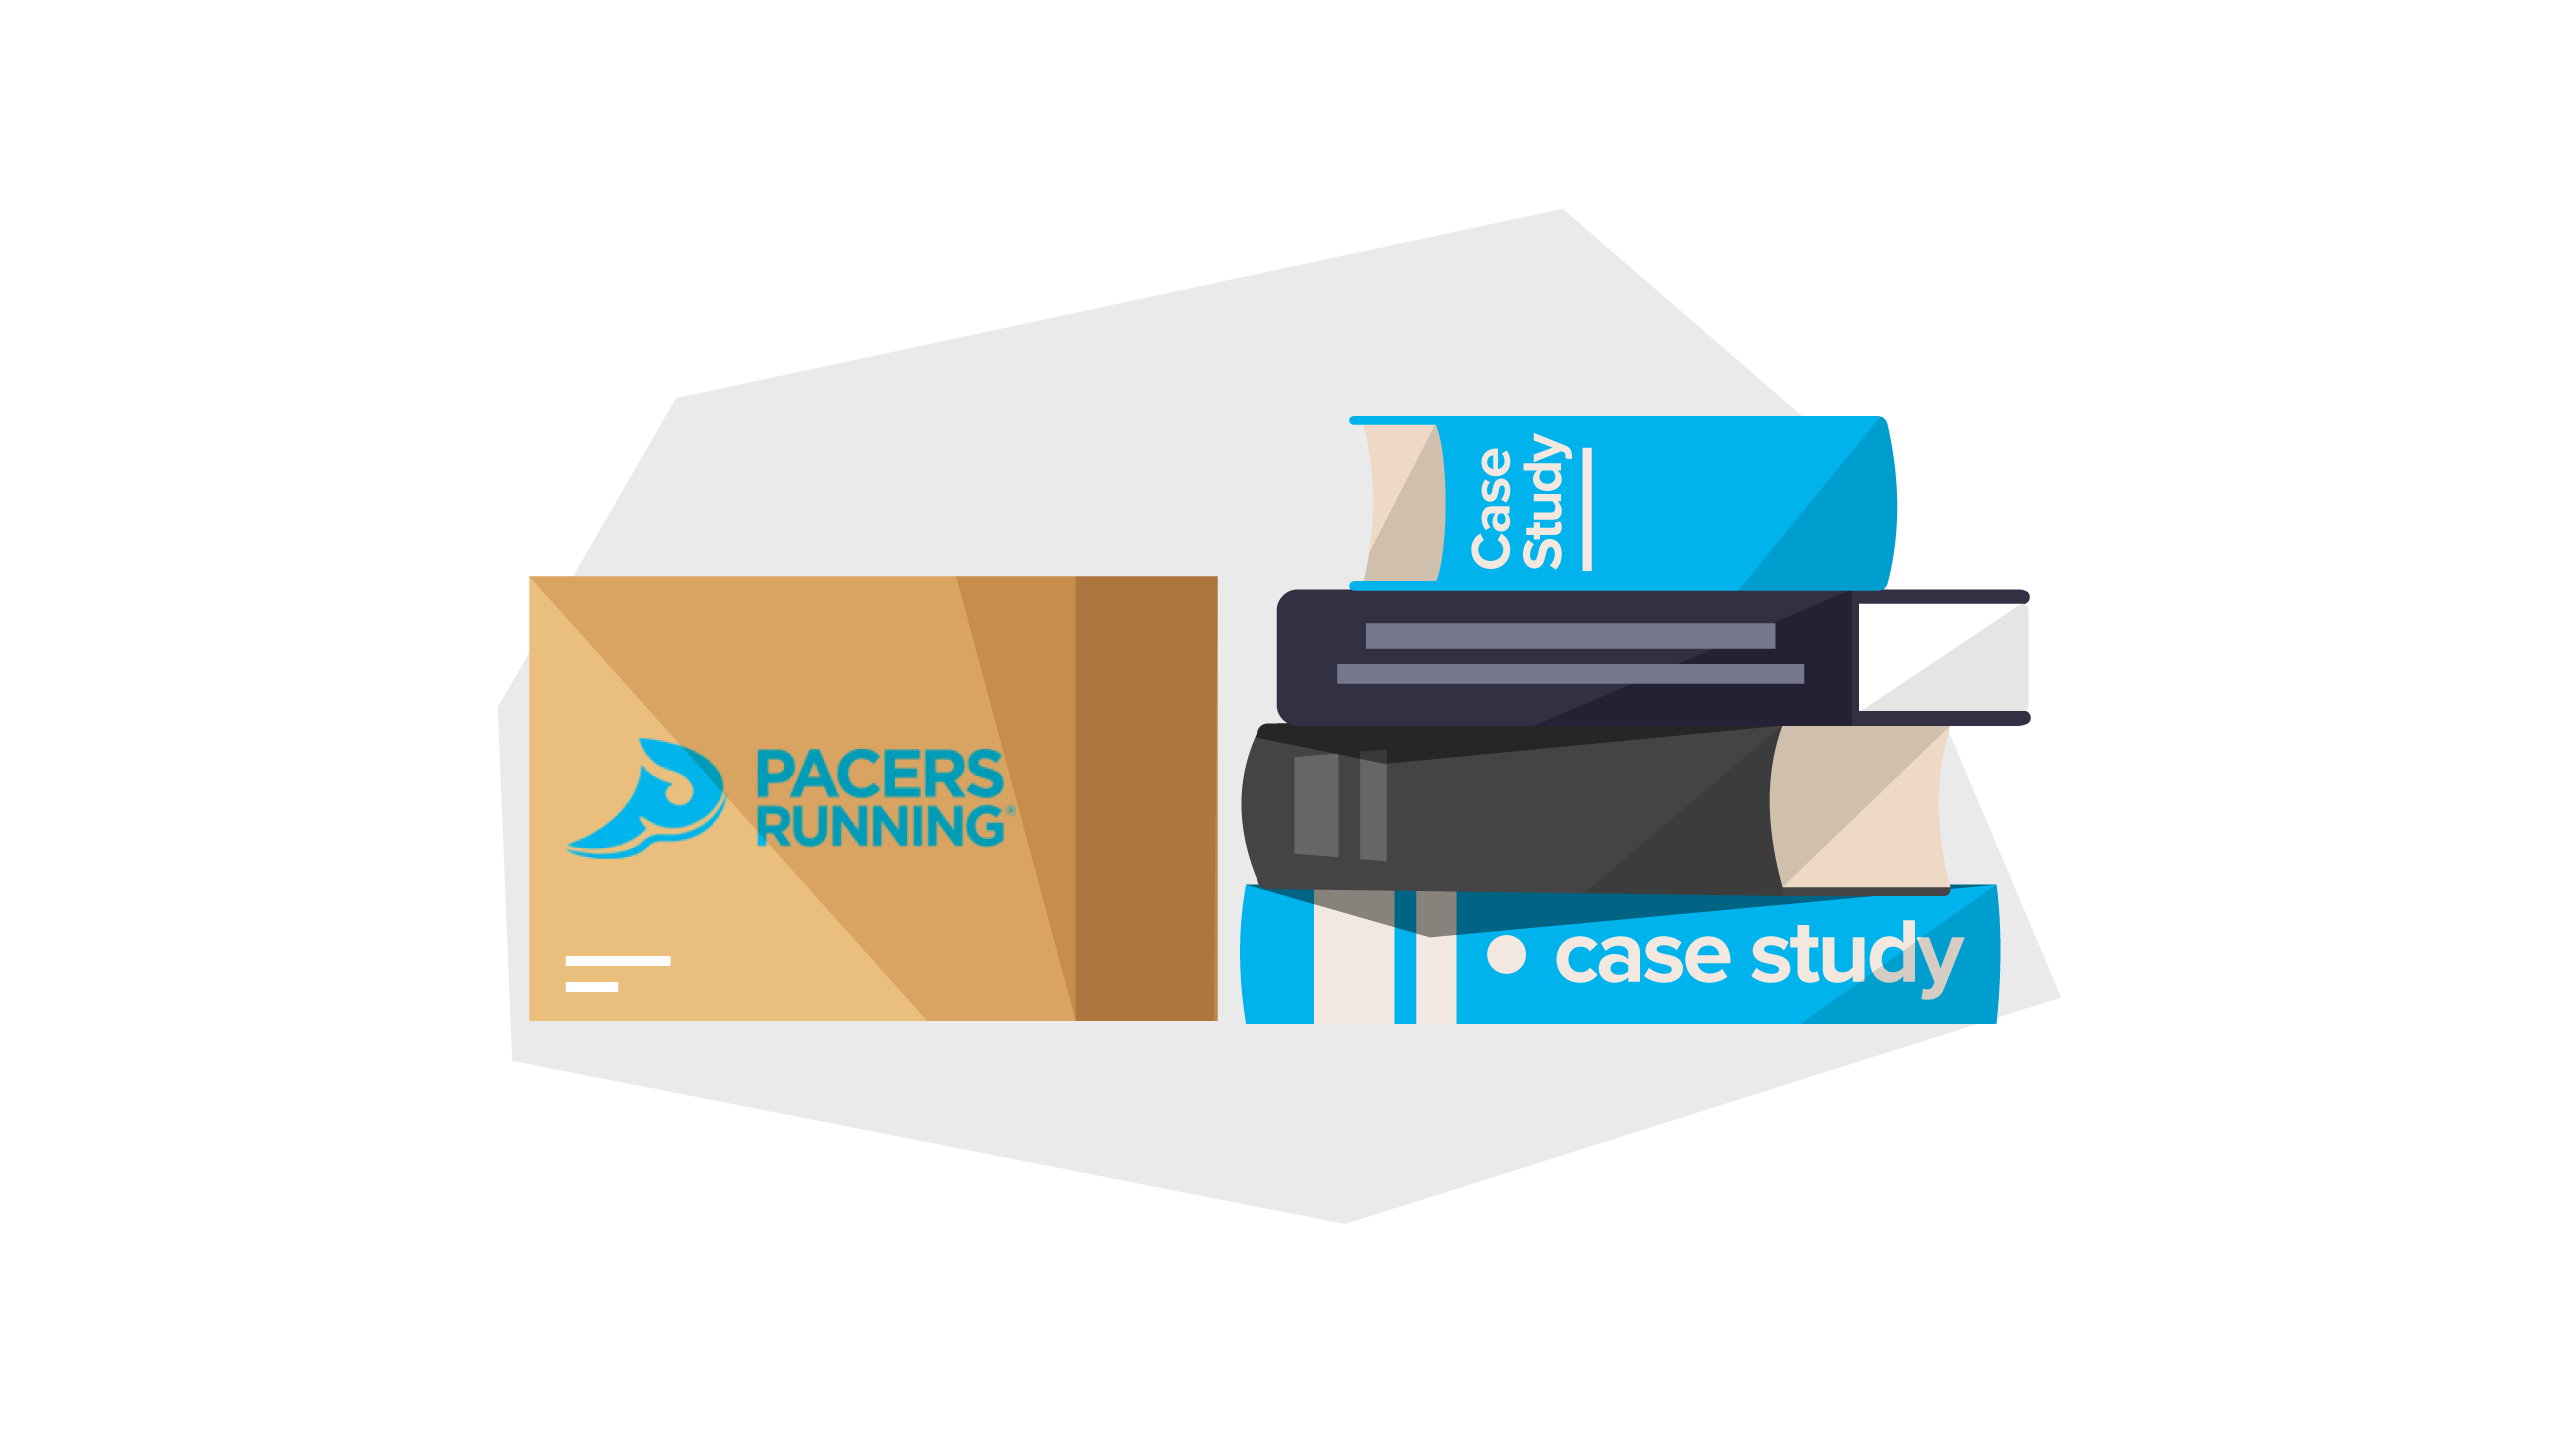 a box that says "pacers running" and a stack of books that say "case study"